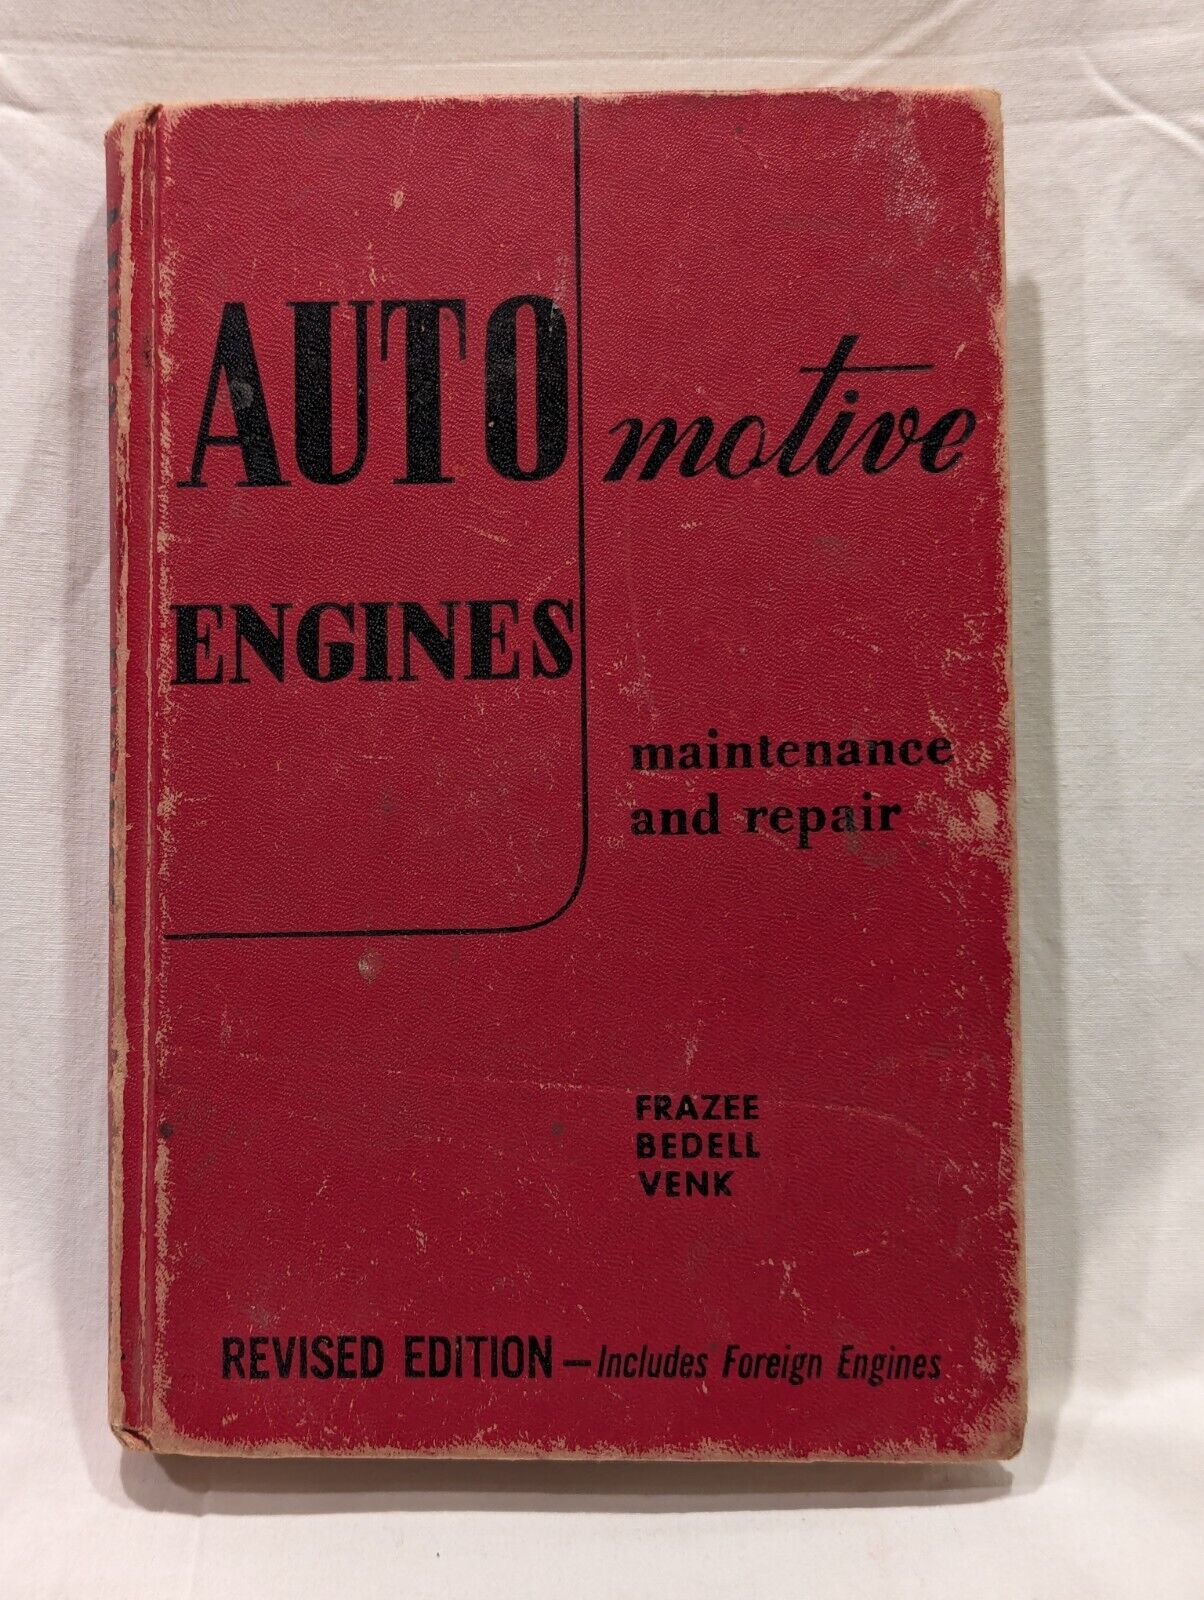 Vintage Book Automotive Engines Maintenance and Repair - Frazee Bedell Venk 1958